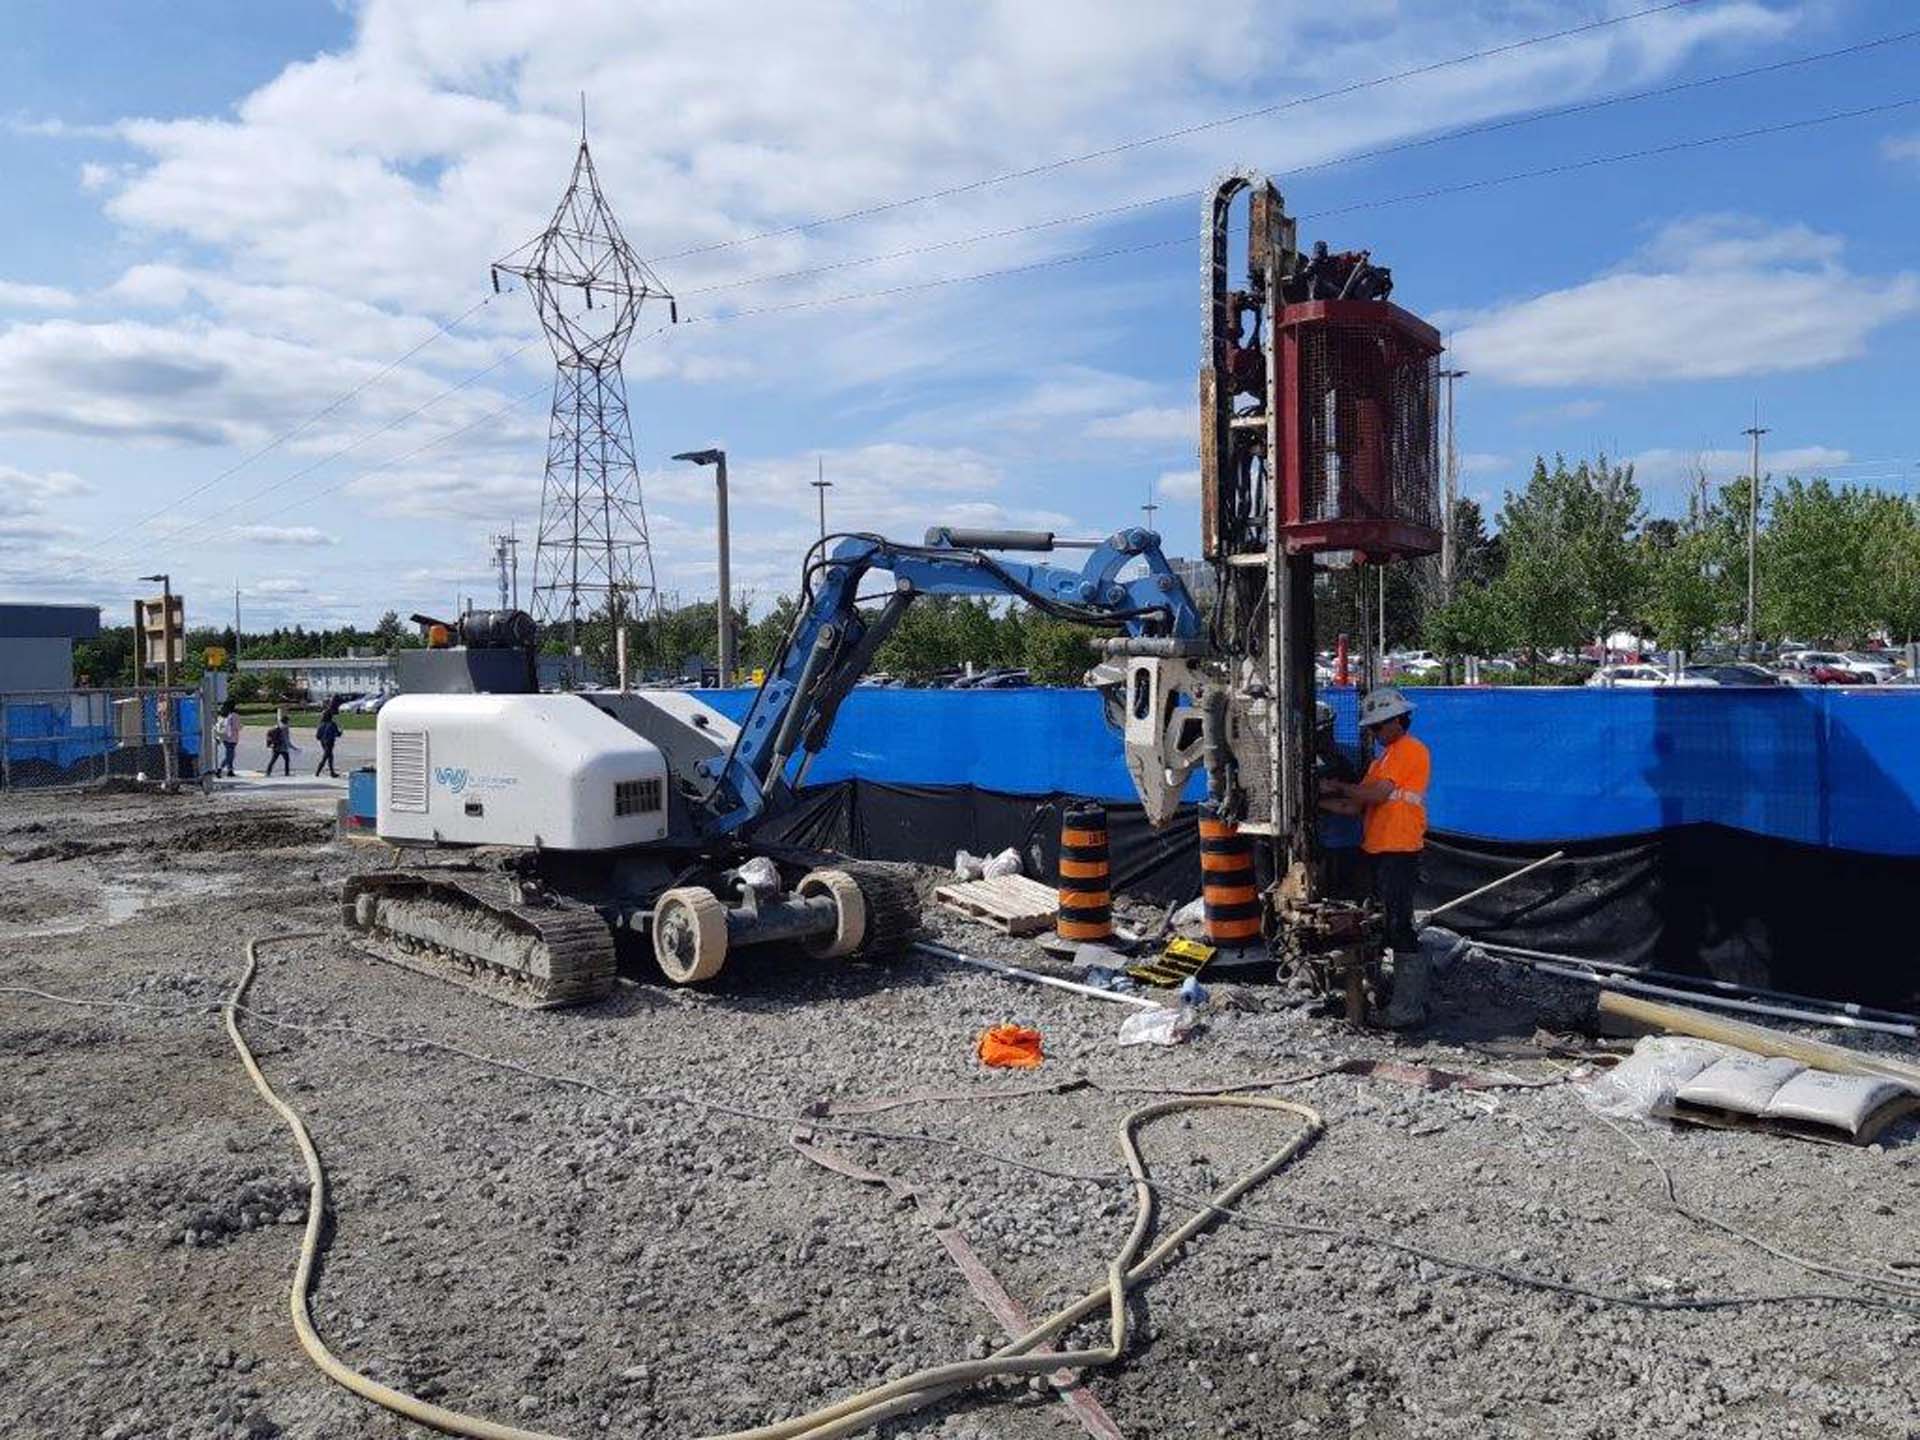 WJ’s Baby Giraffe drilling rig installing wells around the perimeter of the UOIT excavation and wellpoints installation